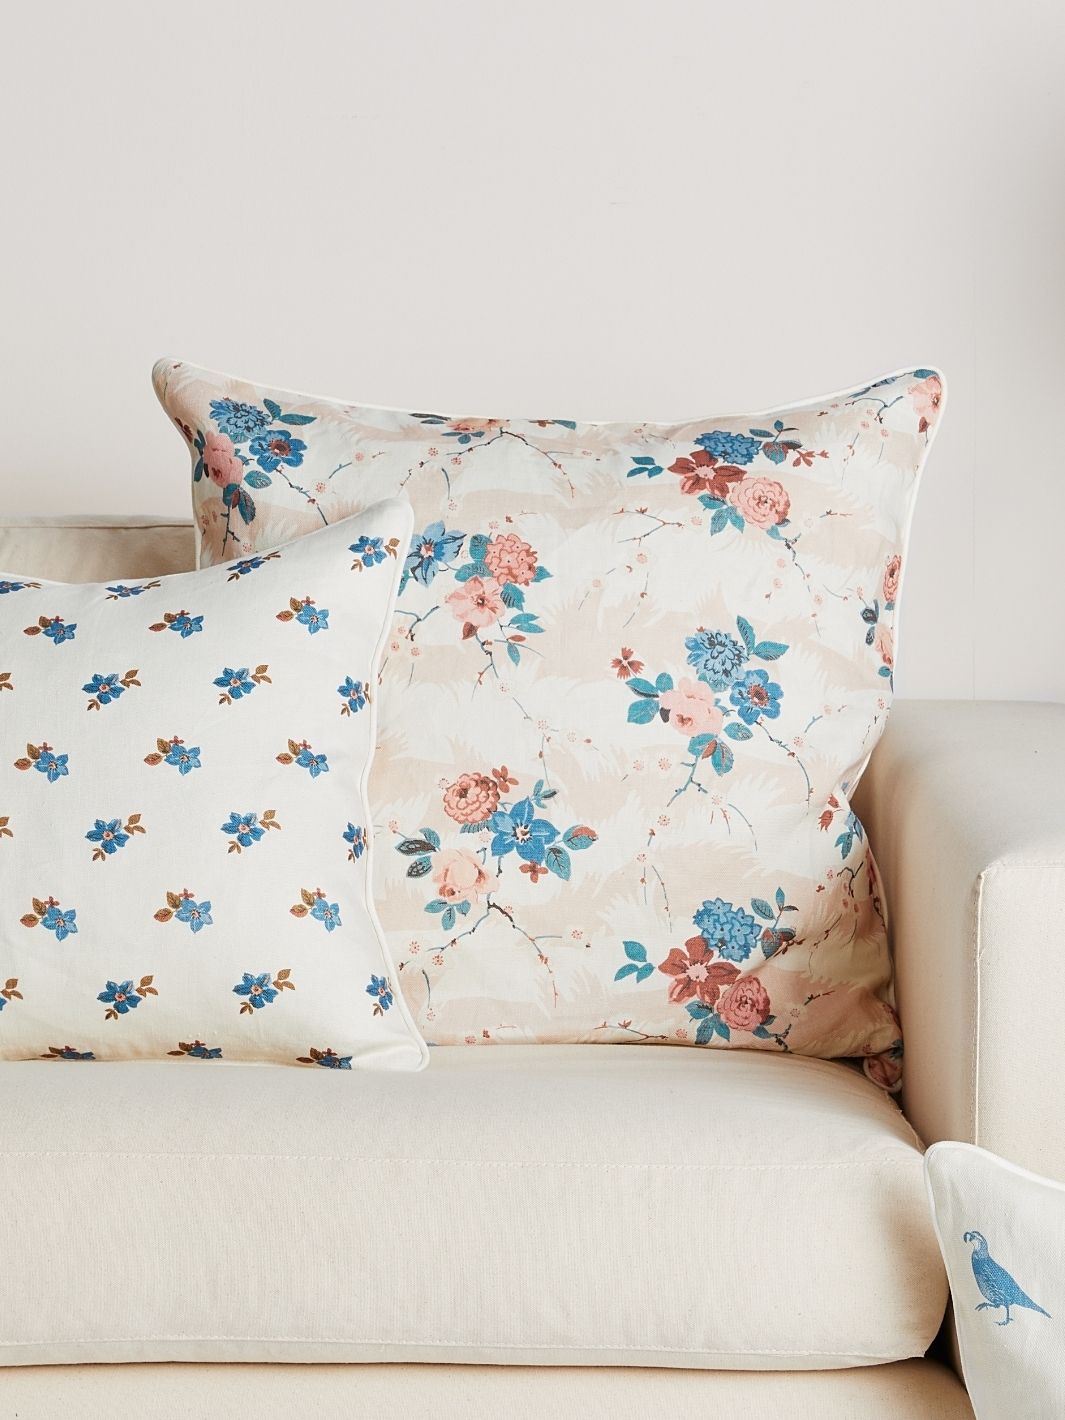 'Dora Chintz' Throw Pillow by Nathan Turner 24x24 - Pink + Blue on Linen